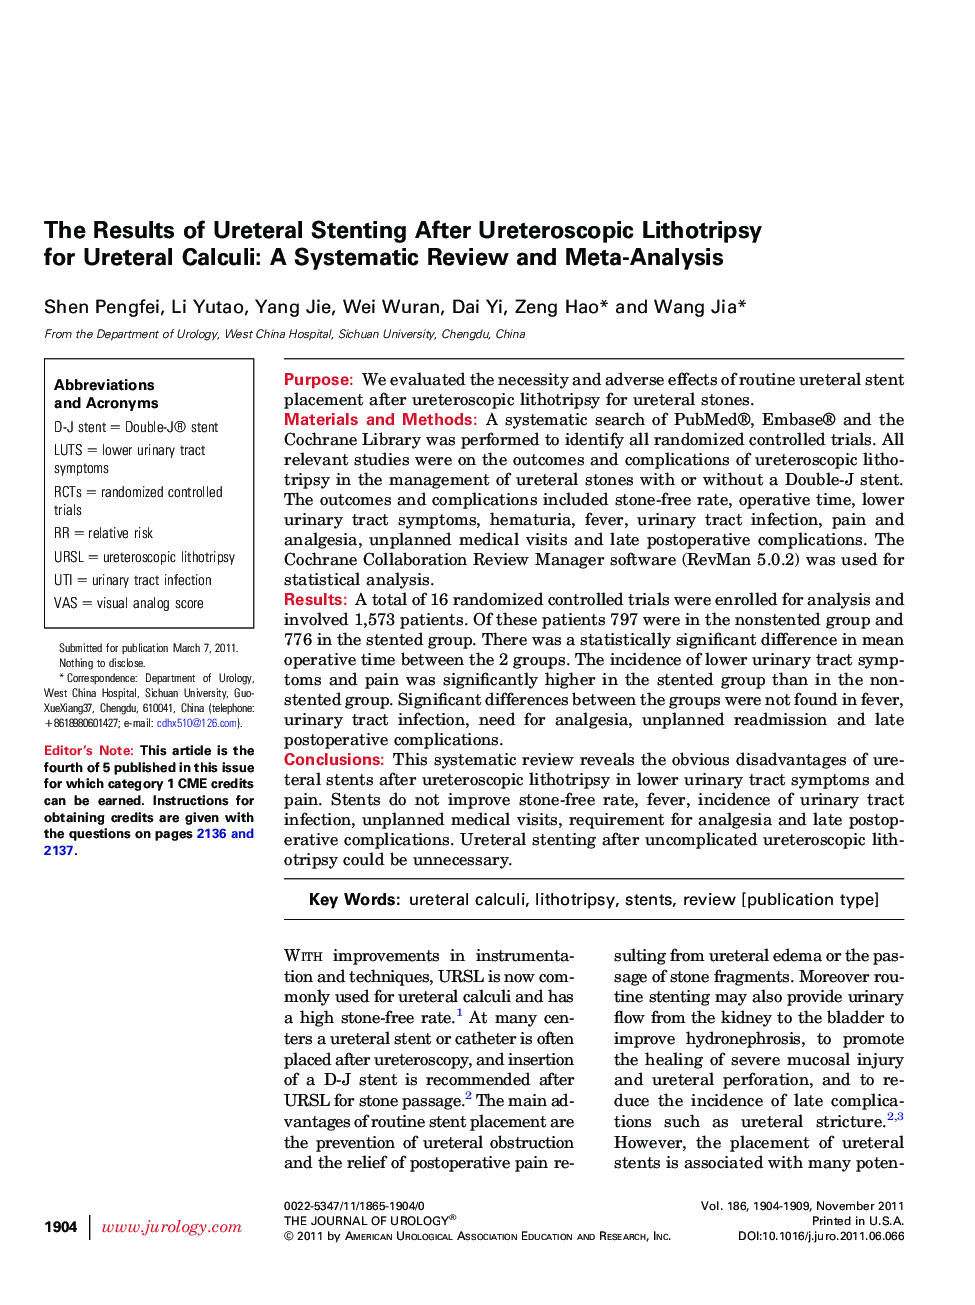 The Results of Ureteral Stenting After Ureteroscopic Lithotripsy for Ureteral Calculi: A Systematic Review and Meta-Analysis 